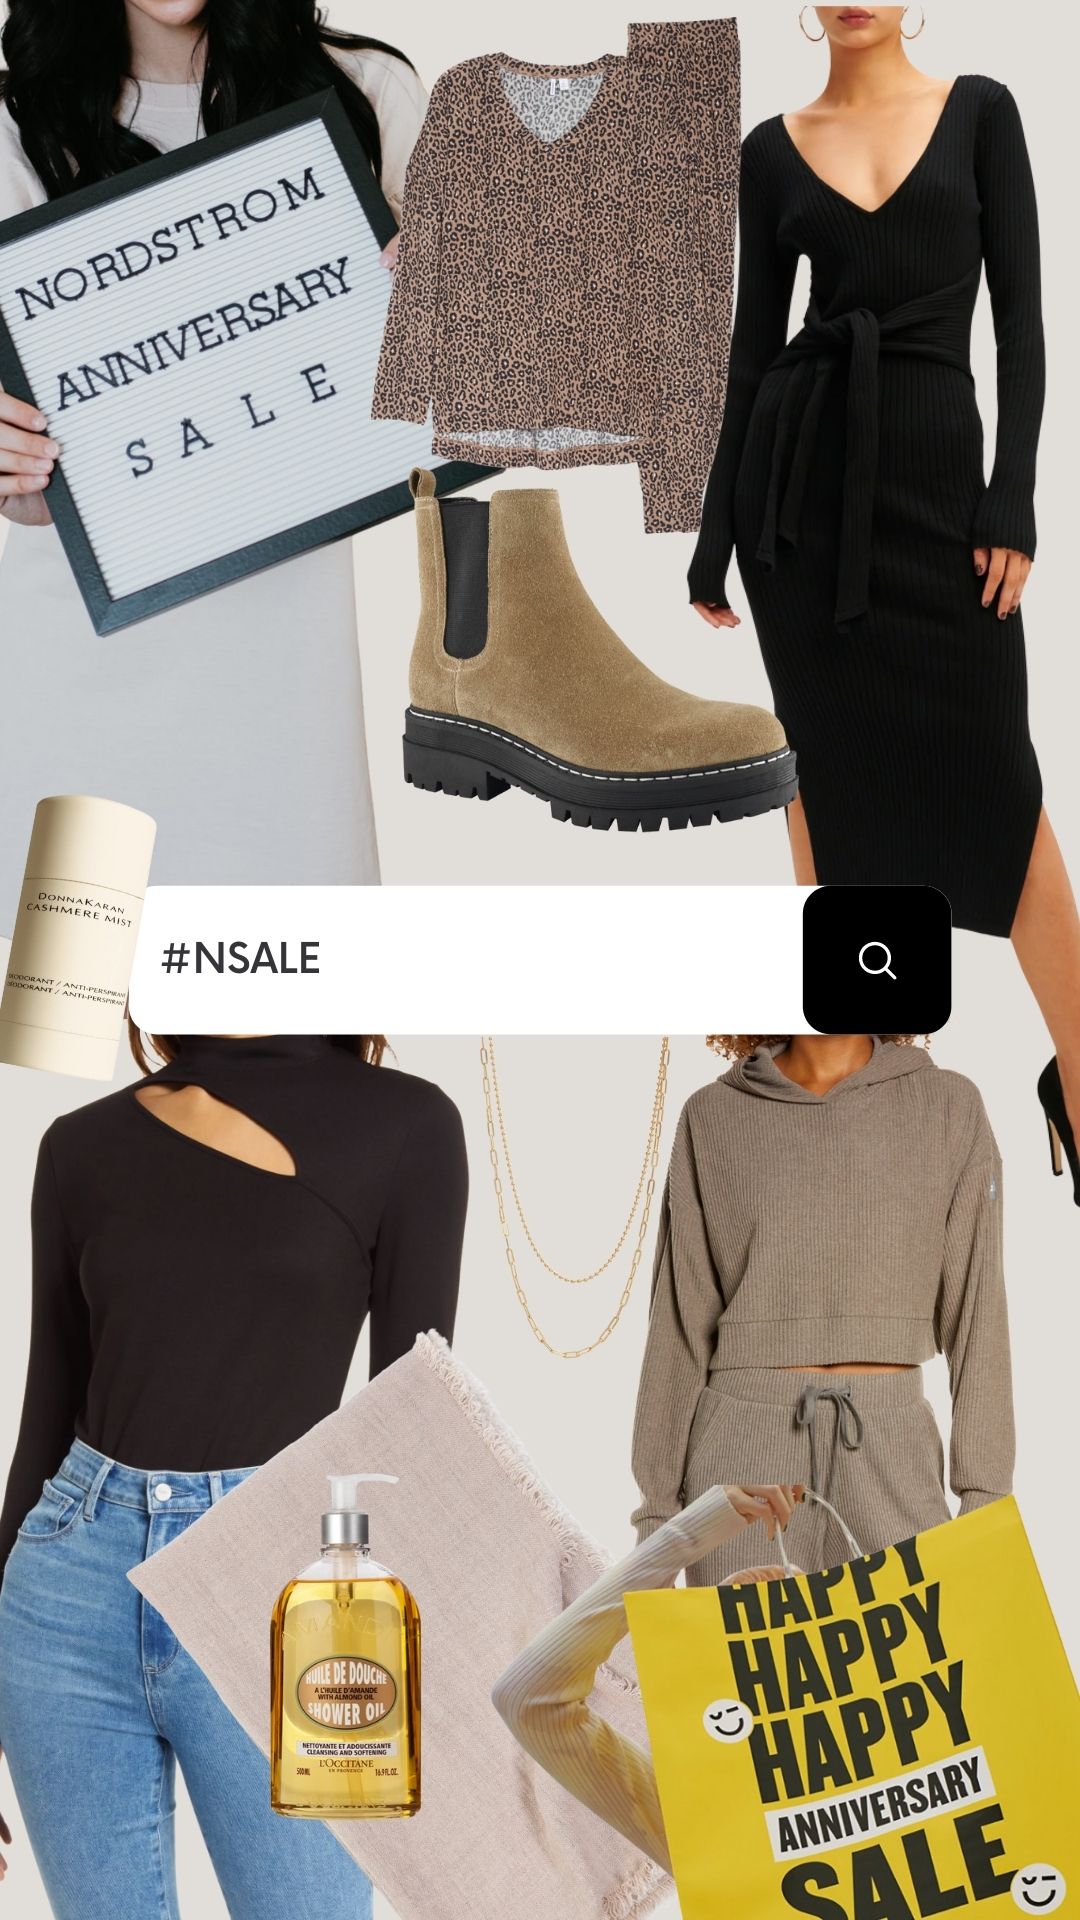 Nordstrom Anniversary Sale | Las Vegas fashion | Outfits and Outings